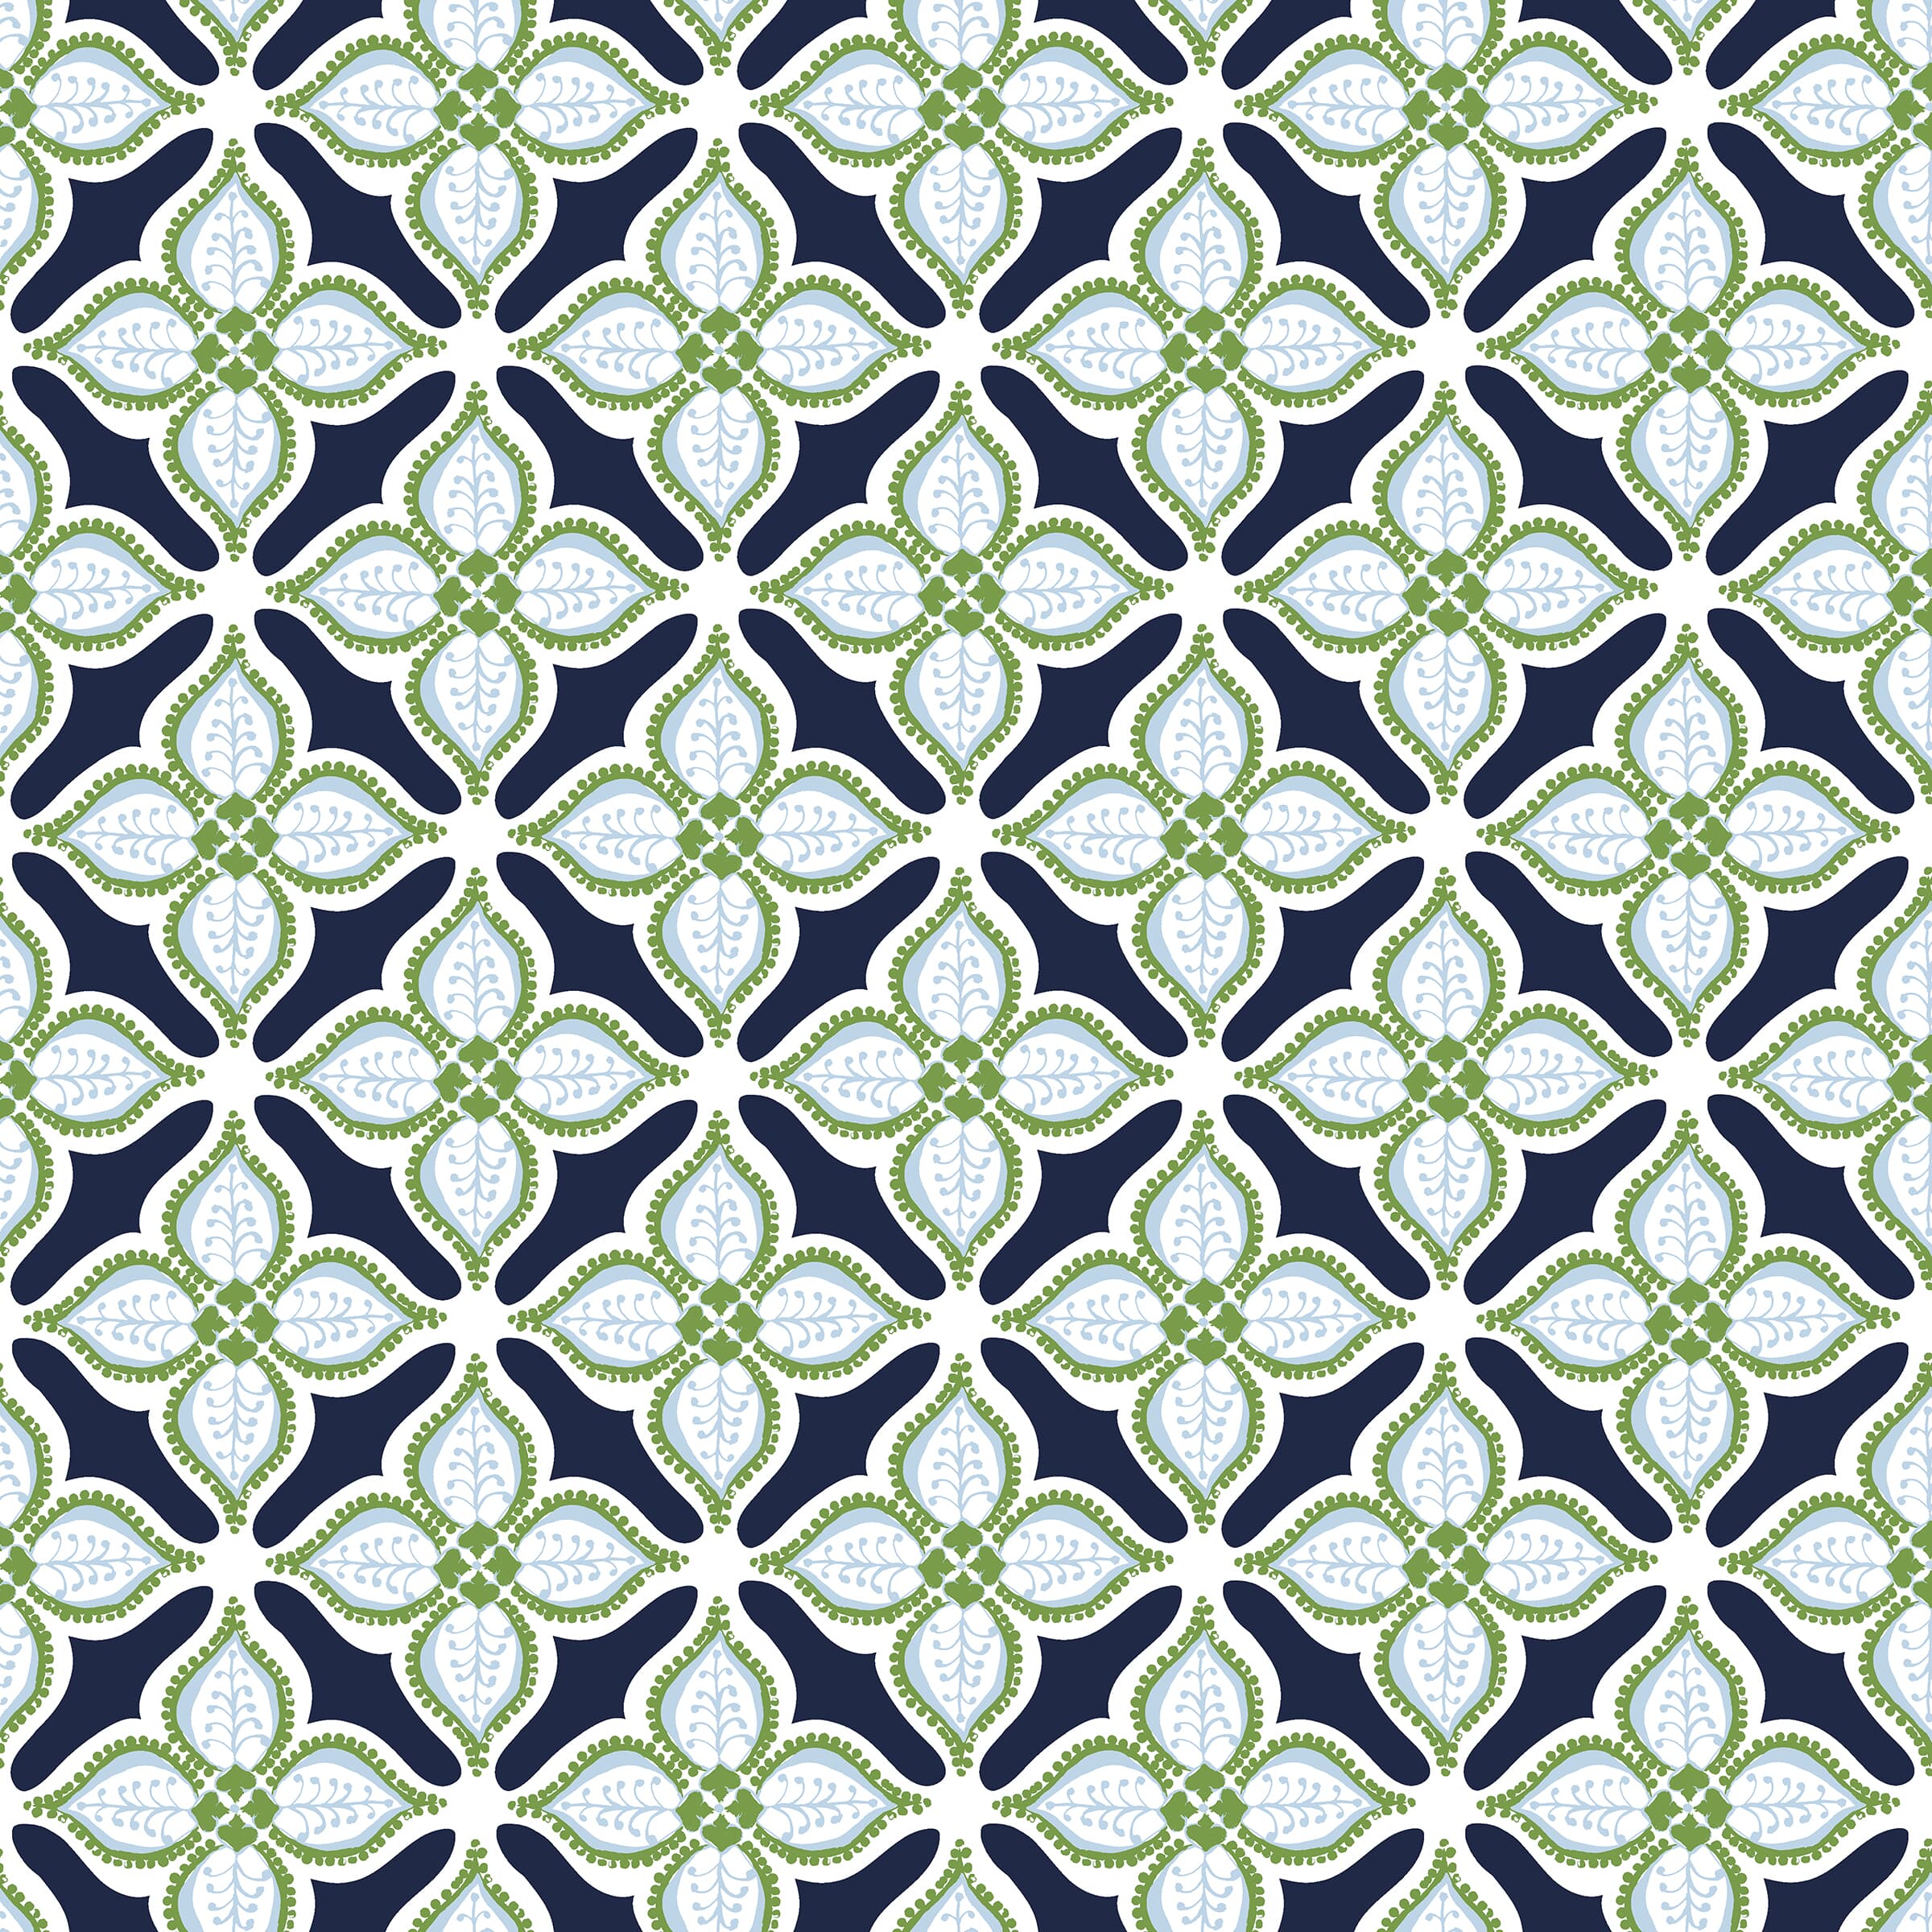 W03vl-1 Glimmer Navy Wallpaper by Stout Fabric